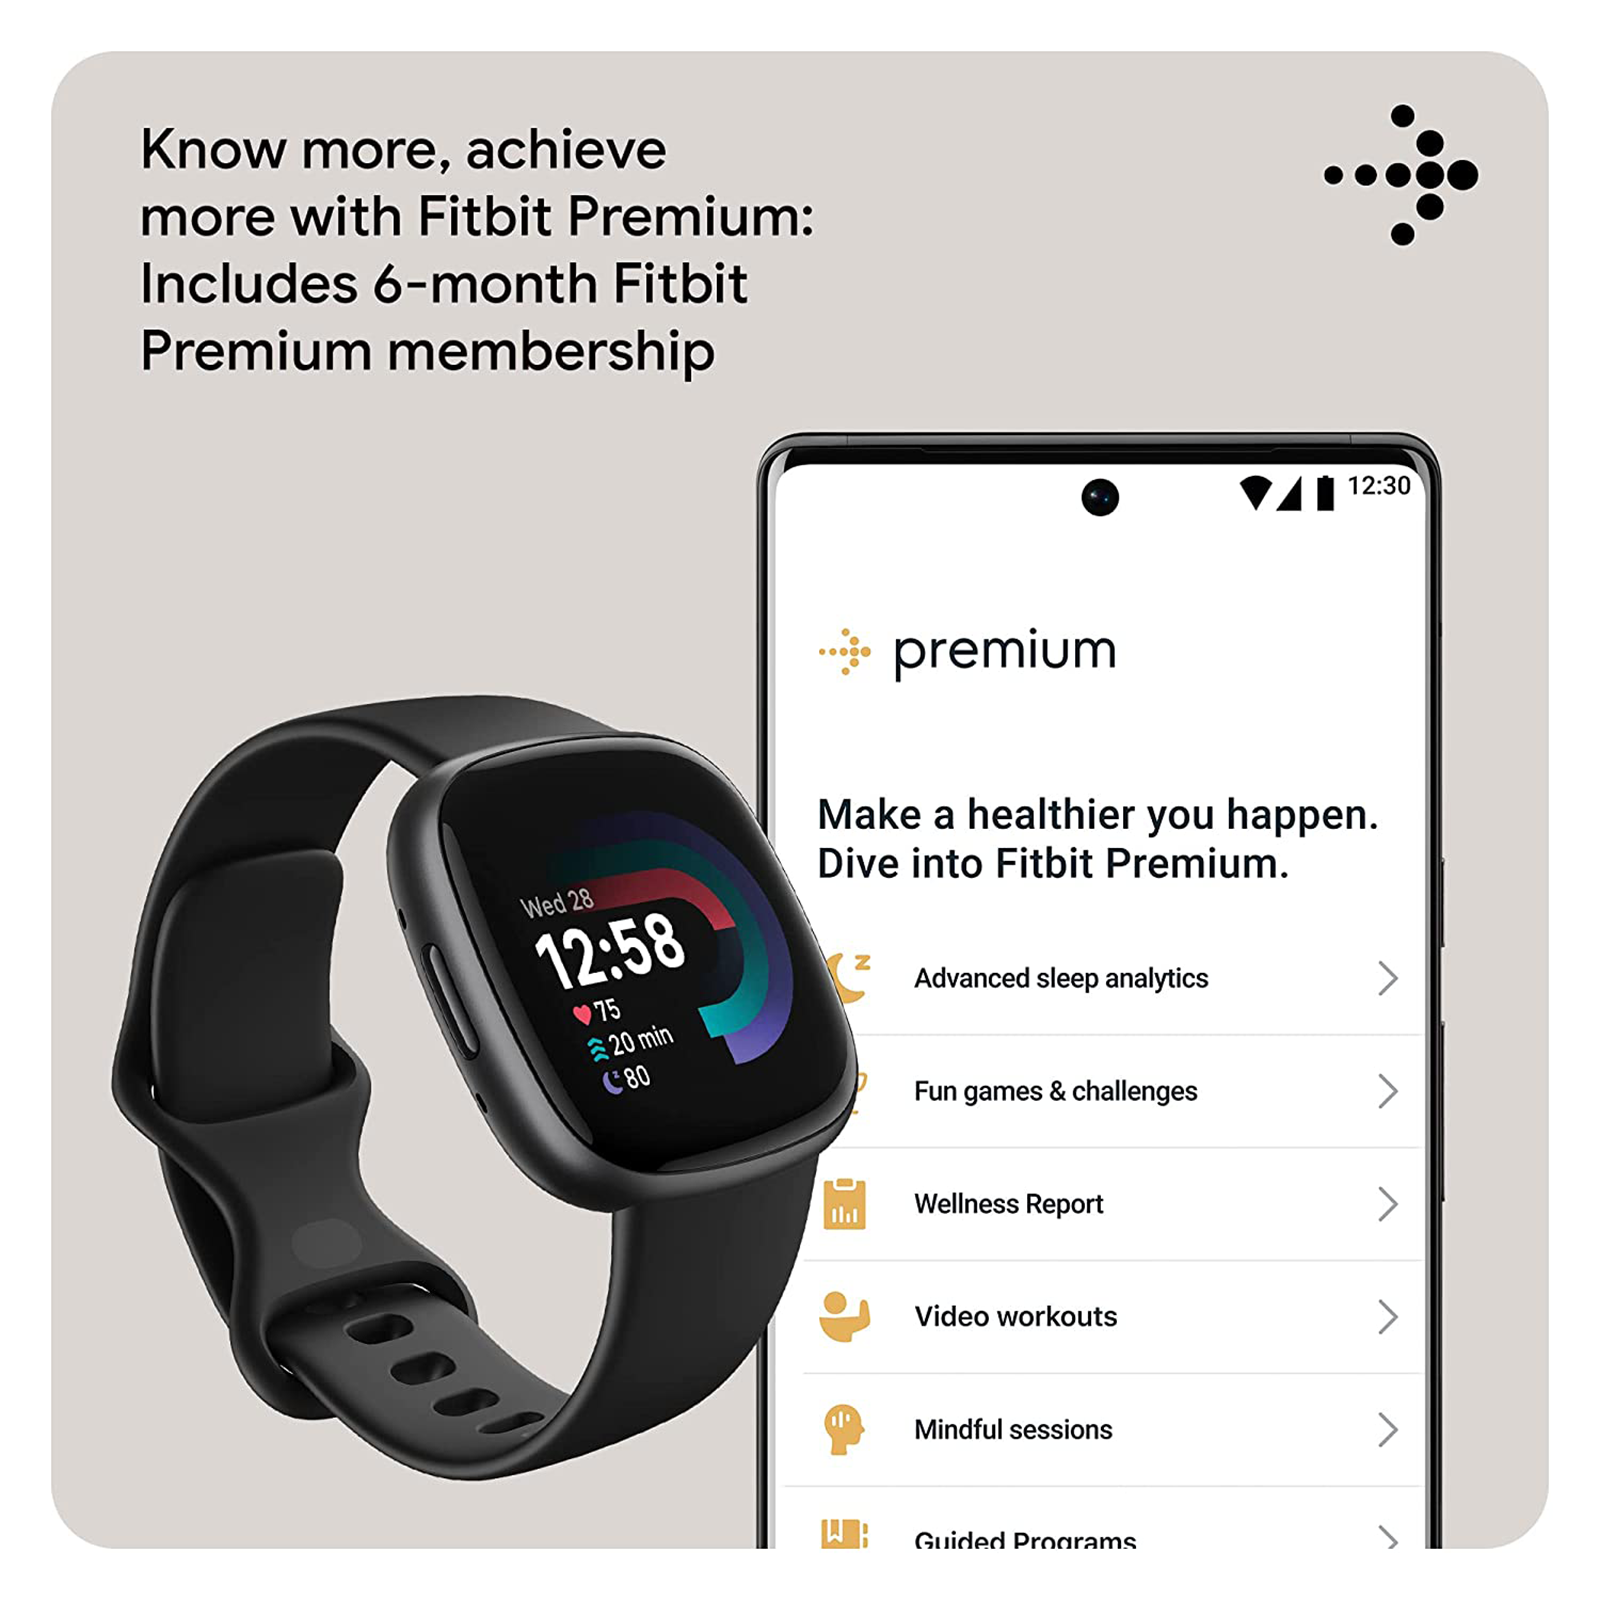 Fitbit Versa 3: Best Fitbit Watch That Delivers| Popular Science-cacanhphuclong.com.vn